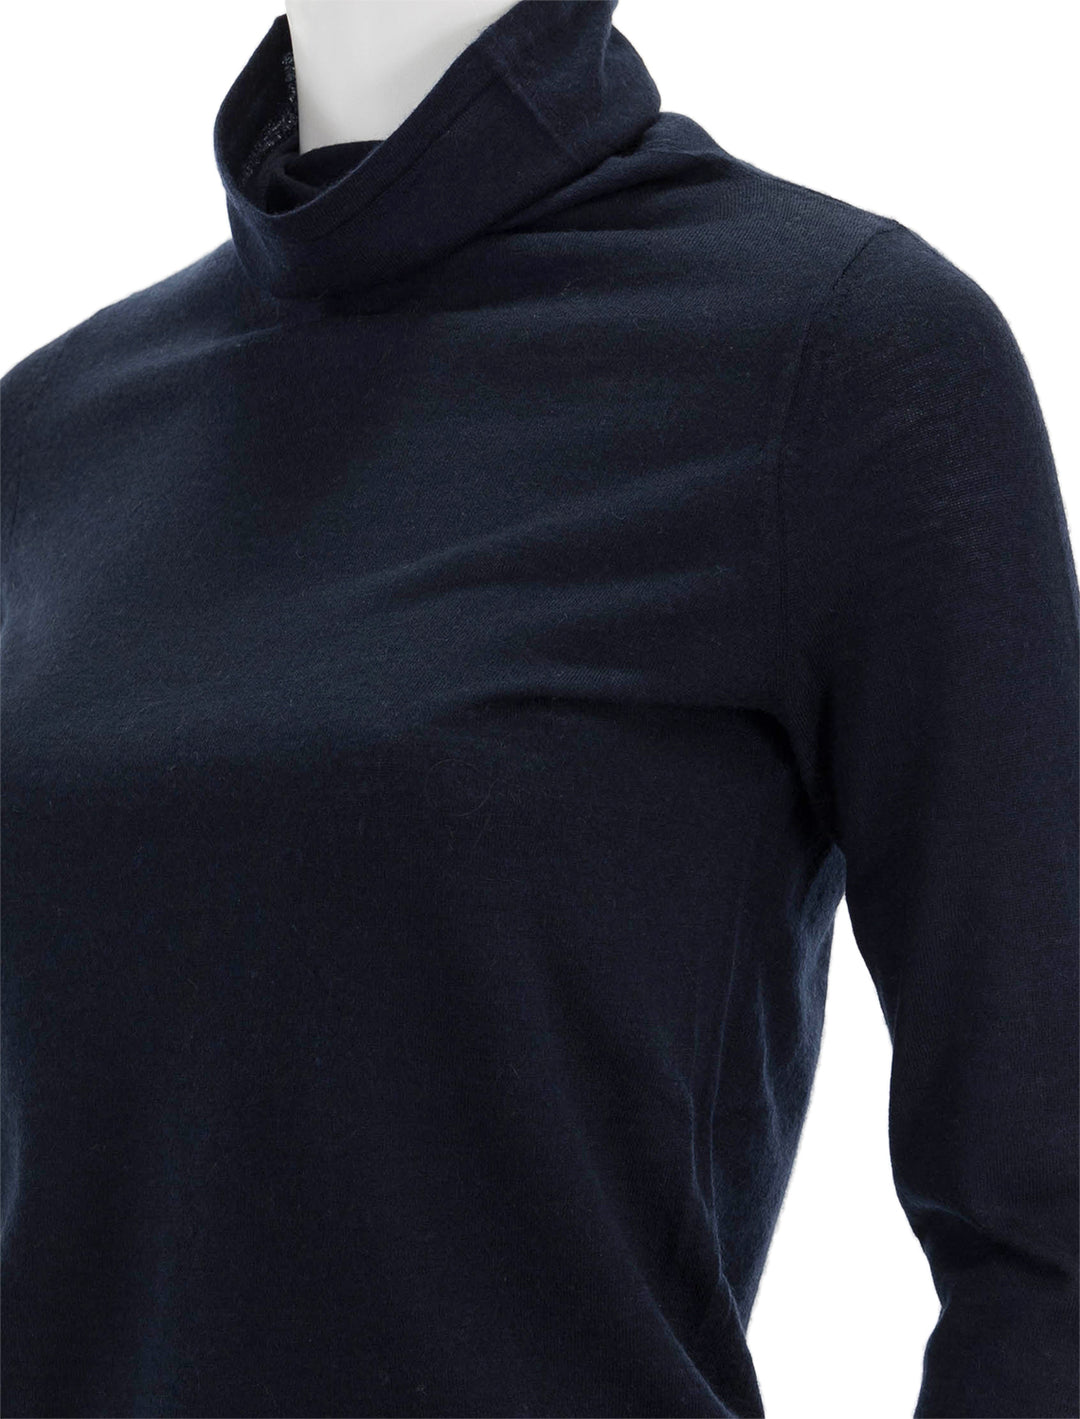 Close-up view of Ann Mashburn's funnel neck cashmere sweater in navy.